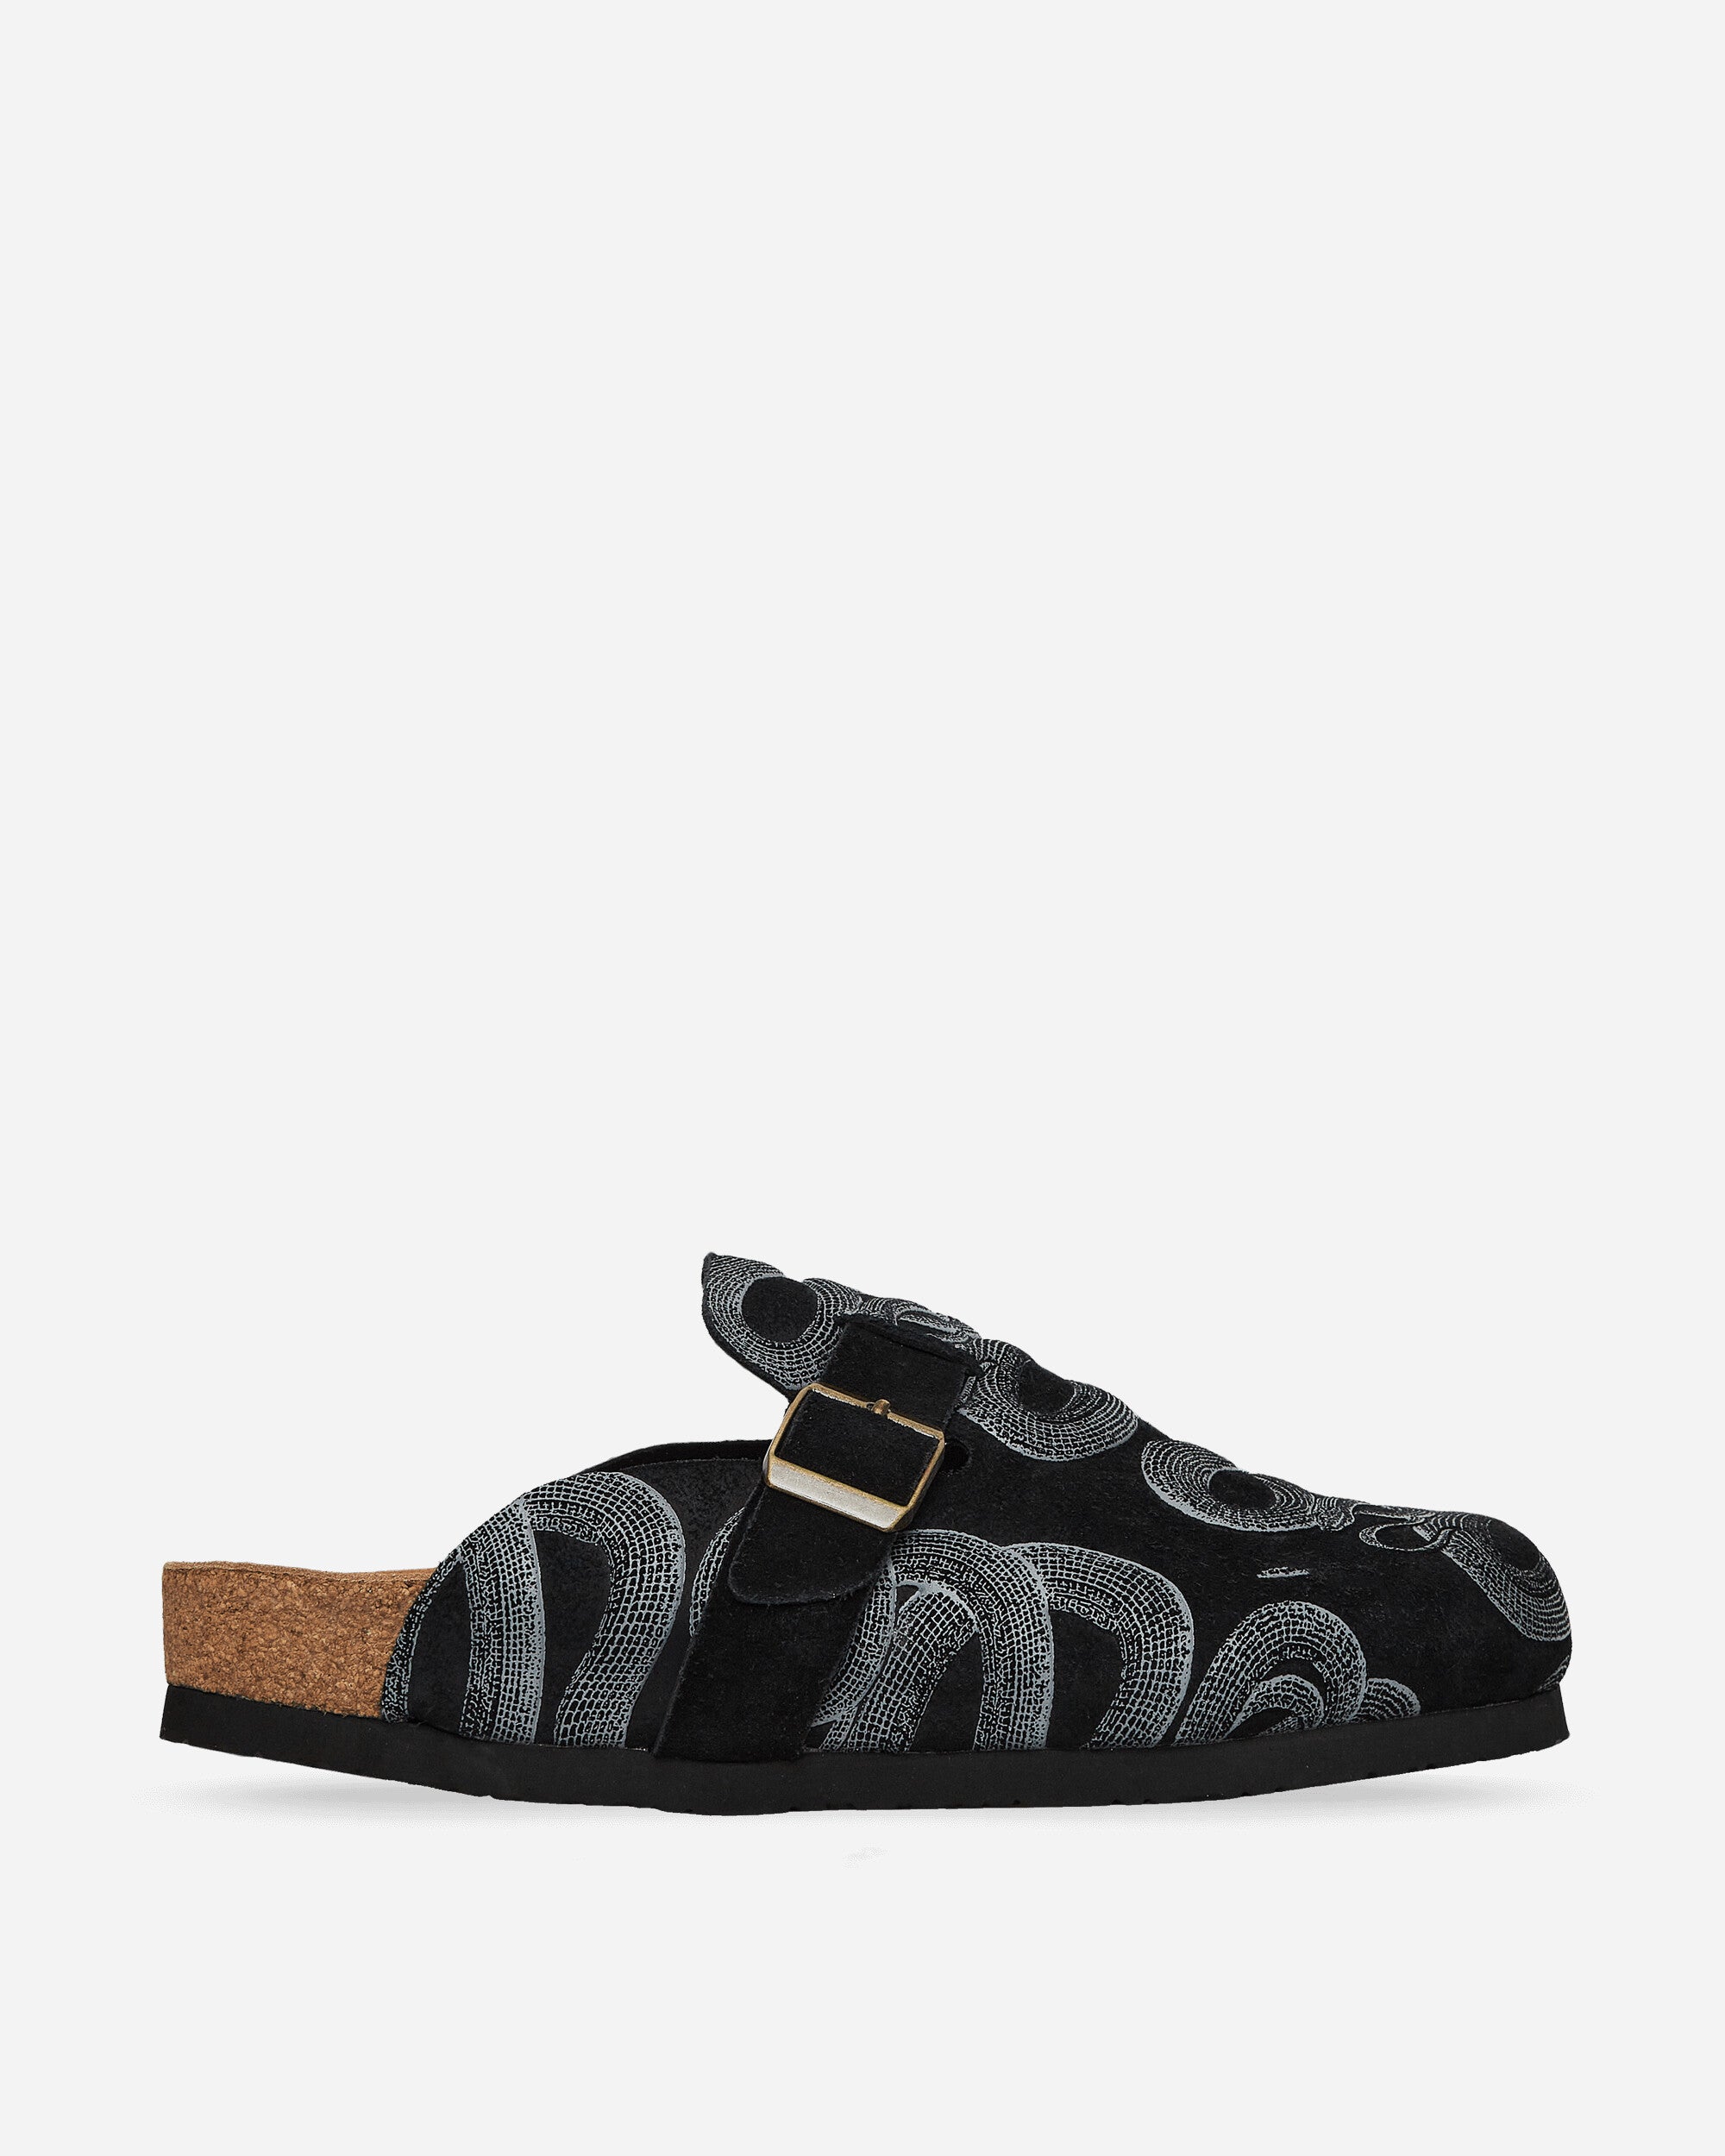 Hysteric Glamour Snake Loop Sandals Black Sandals and Slides Sandals and Mules 01241QS01 C1